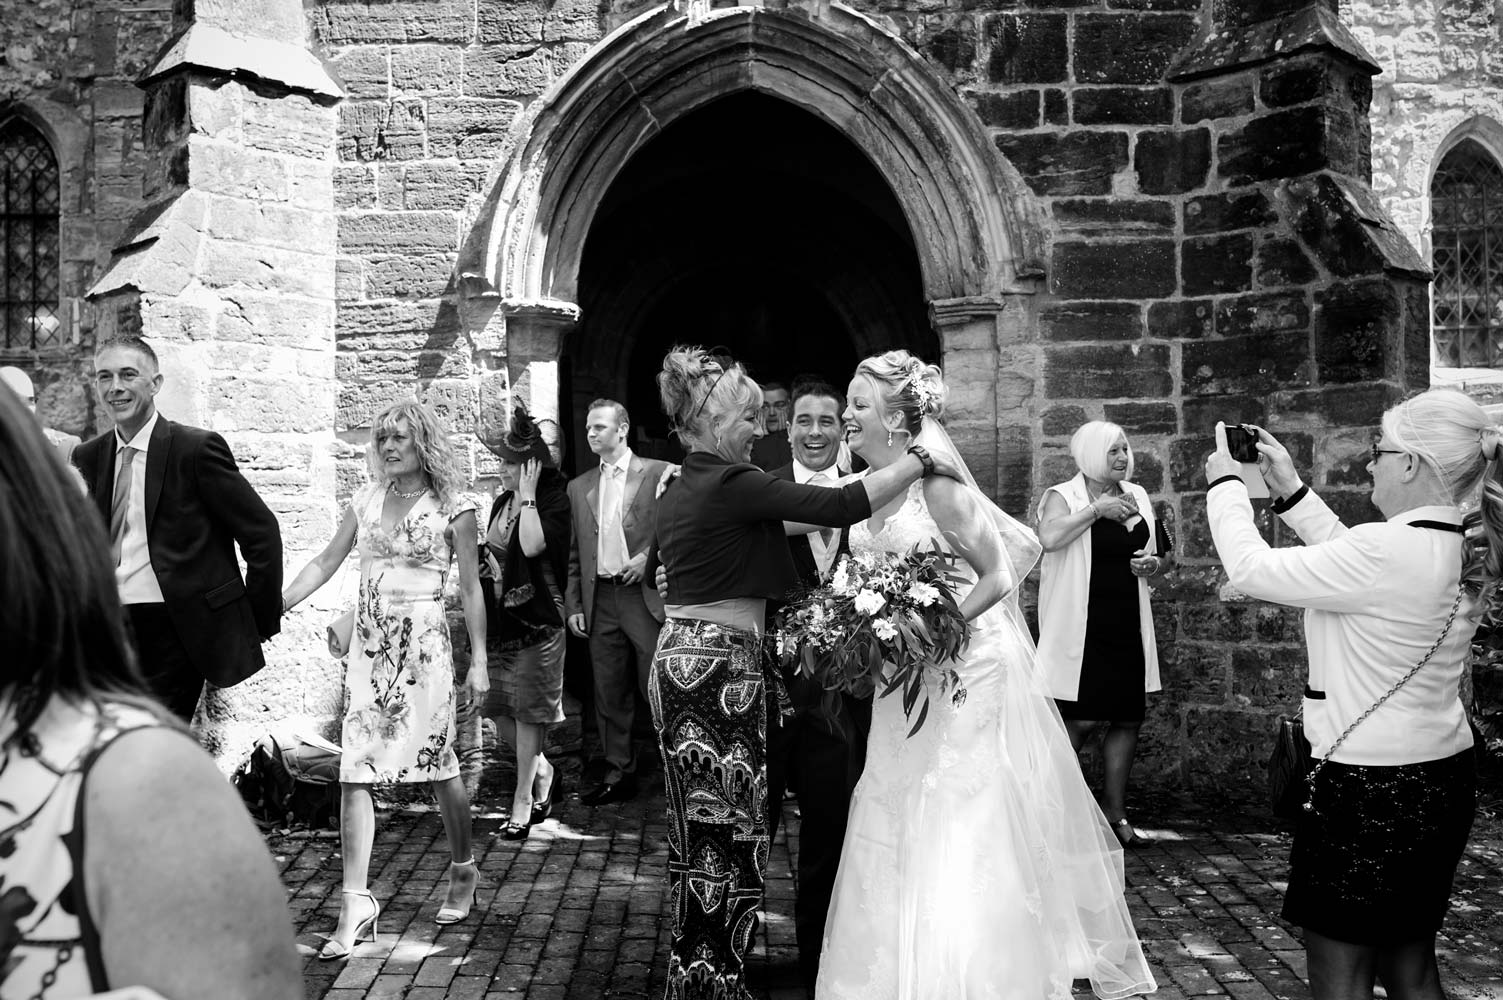 Guests congratulating couple outside church by Sussex documentary wedding photographer James Robertshaw 